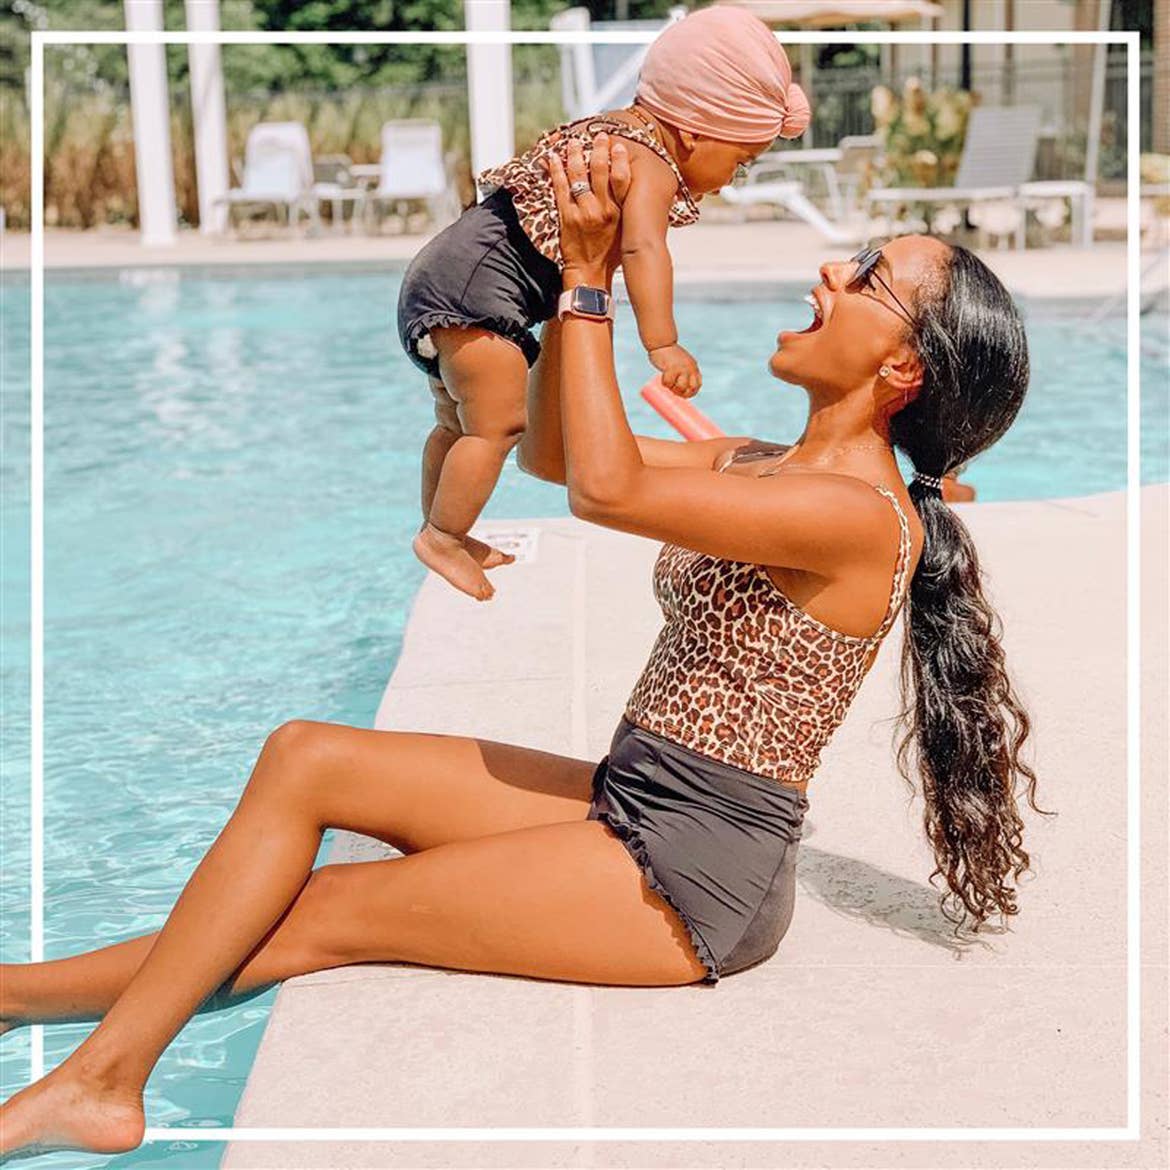 A woman holding her baby in the air next to the pool